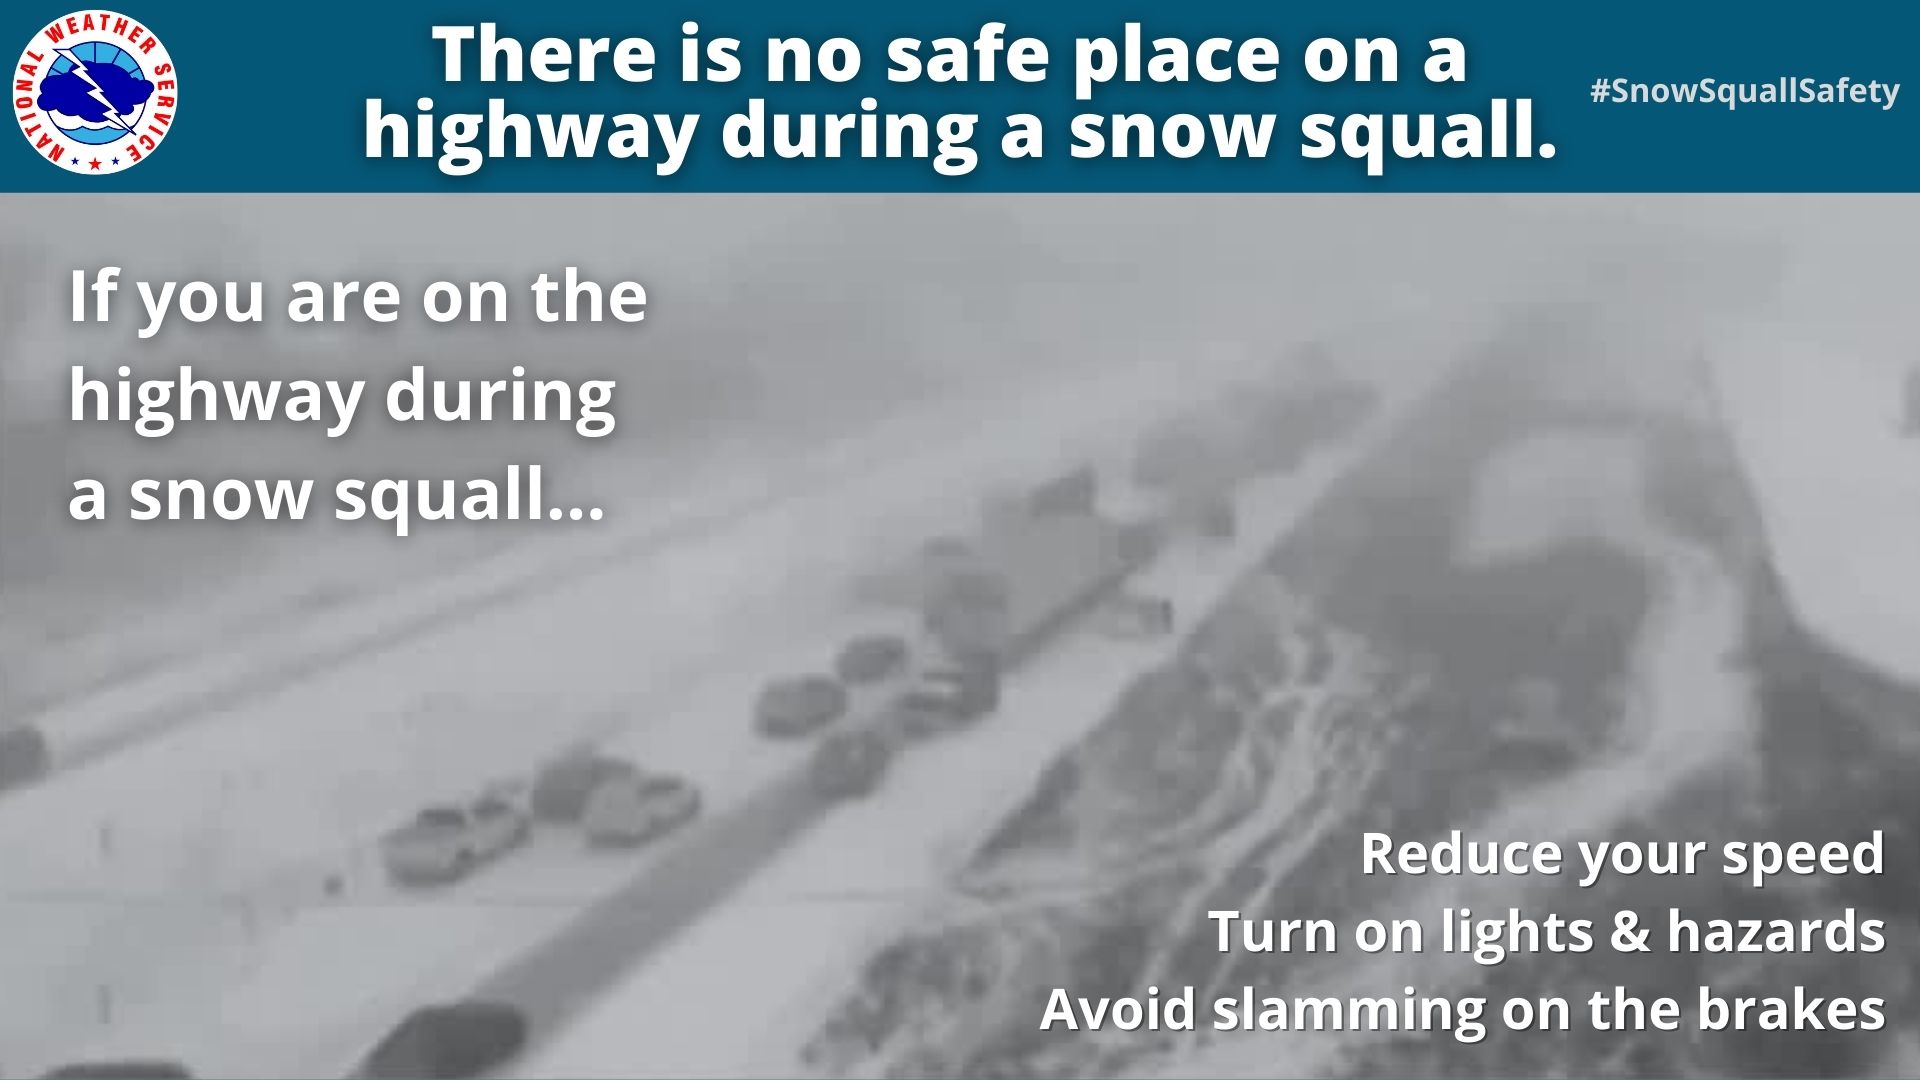 There is no safe place on a highway during a snow squall. If you are on the highway during a snow squallâ€¦ reduce your speed, turn on lights and hazards, and avoid slamming on the breaks. A video outlines an interstate pileup due to a snow squall with low visibility and snow/ice covering the roadway.